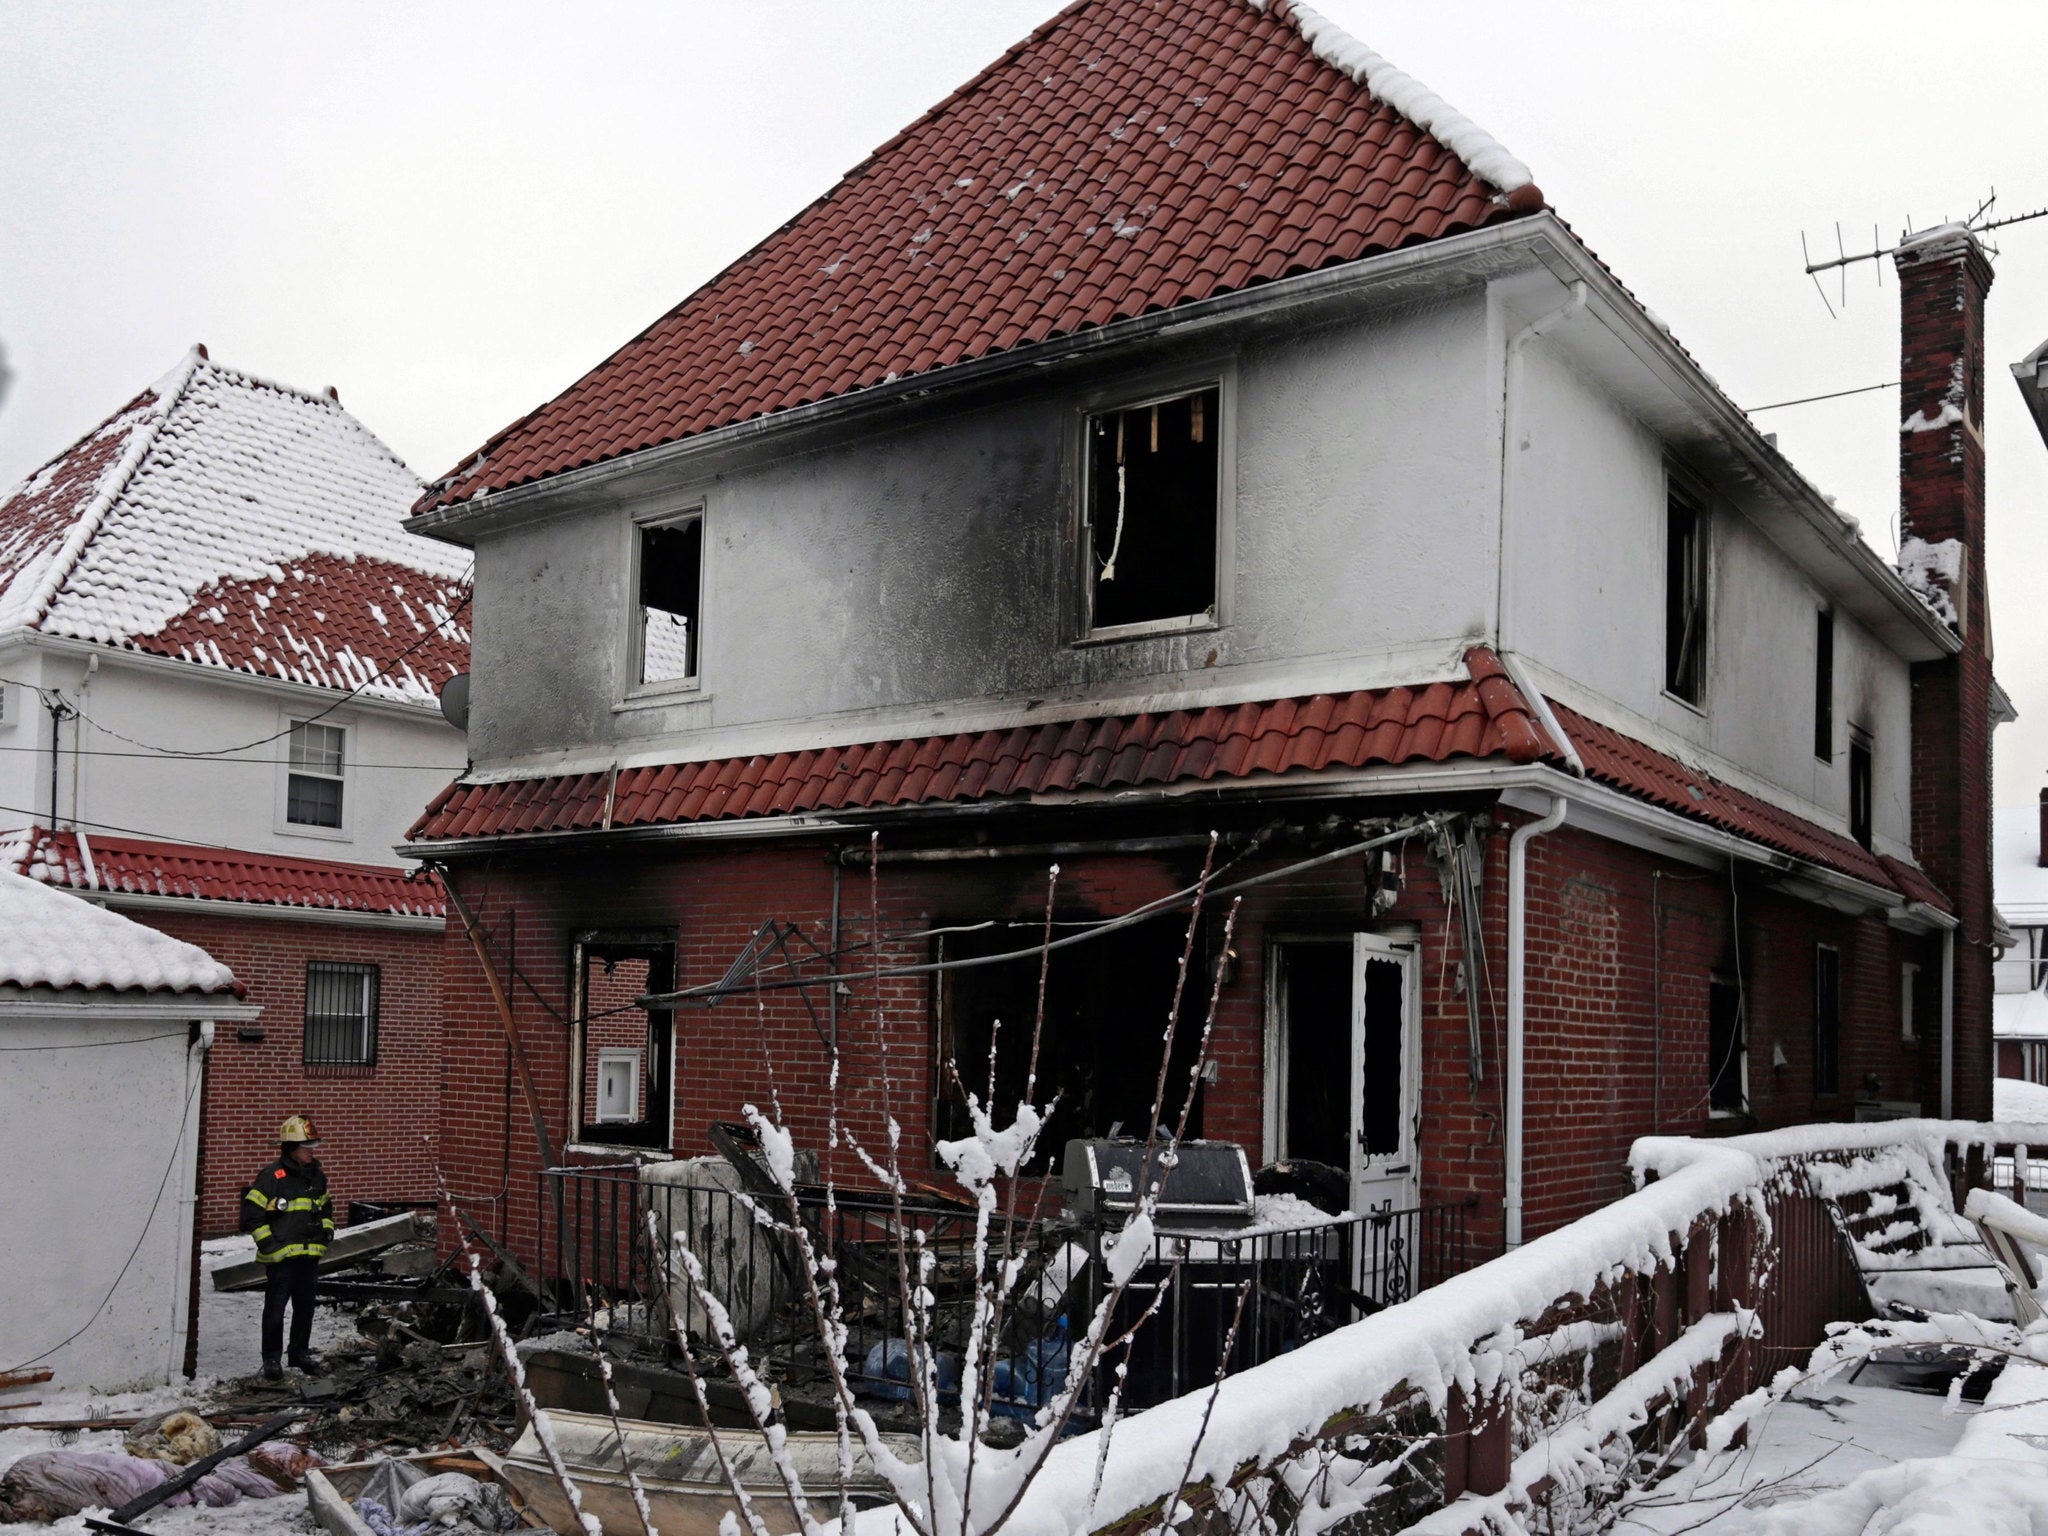 The fire gutted the two-storey house in Brooklyn